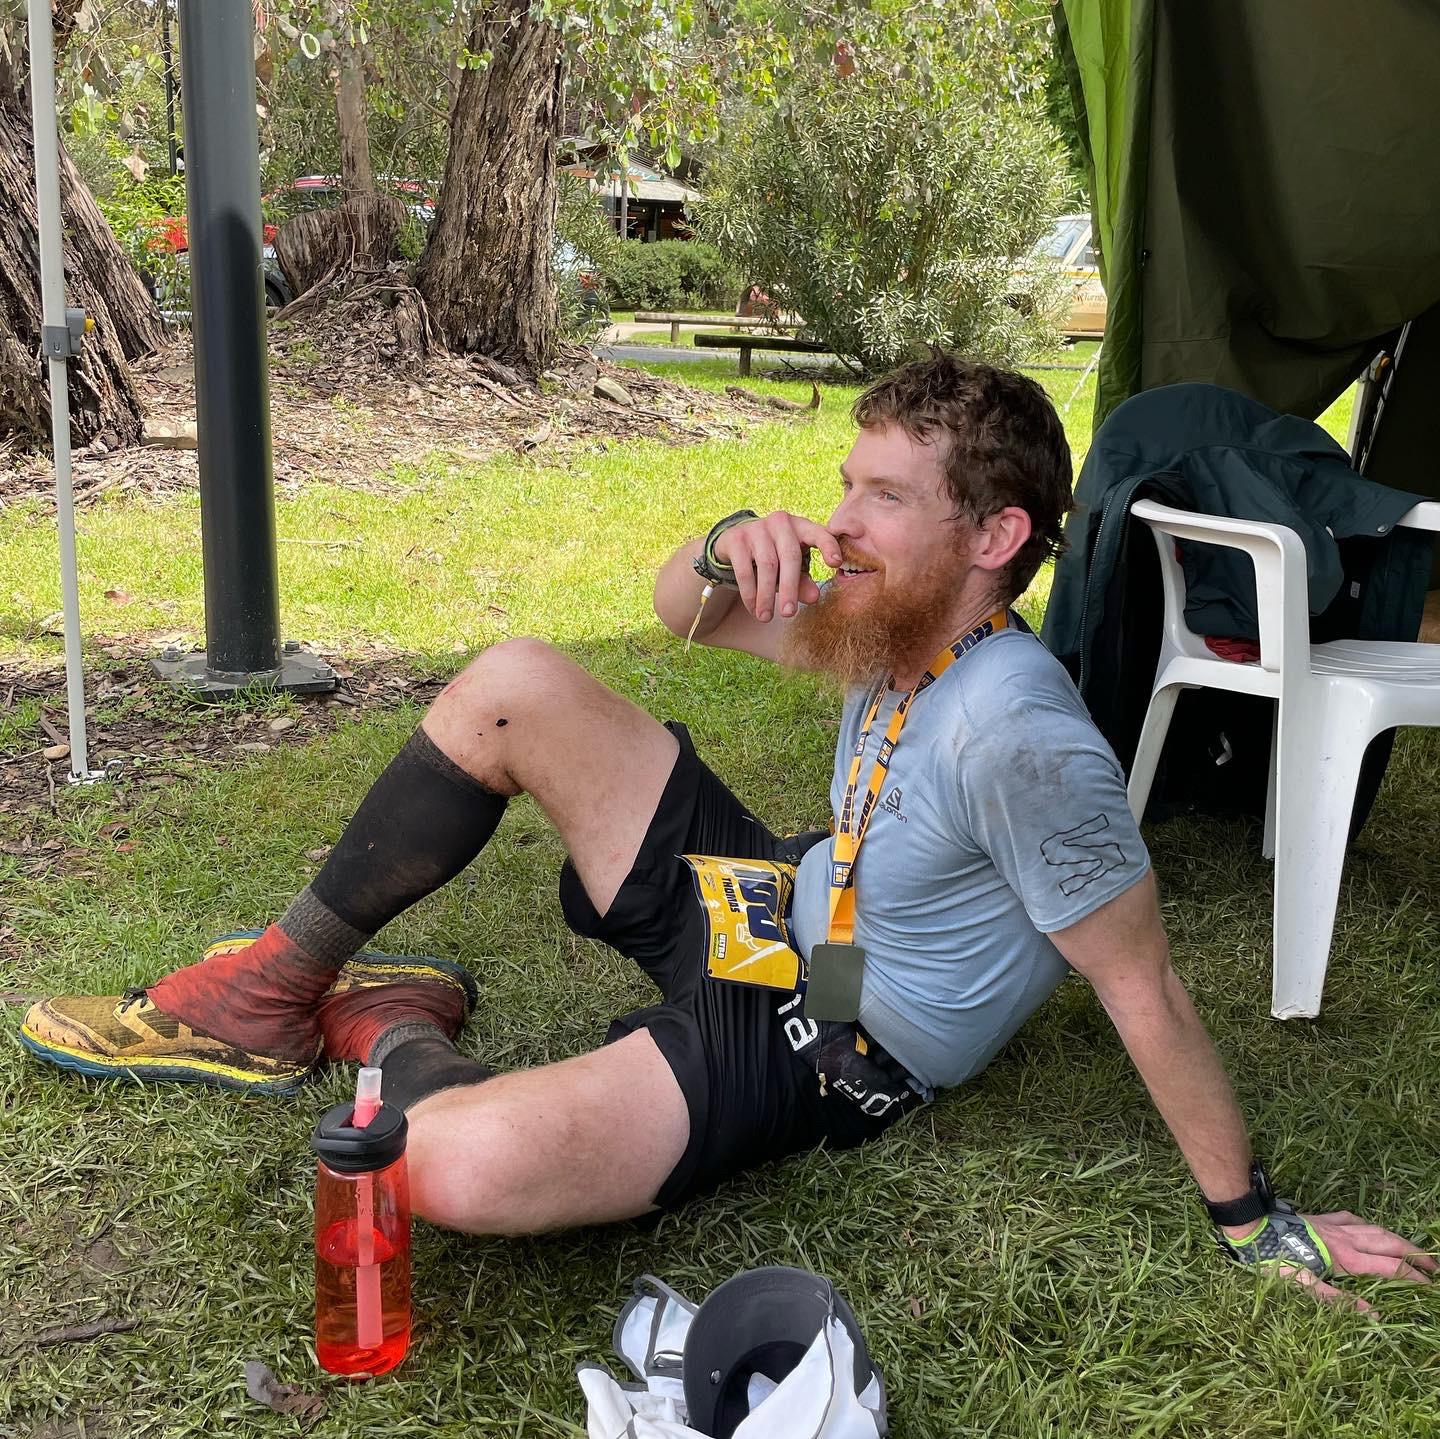 Race Report - Great Southern Endurance Run 100 Mile